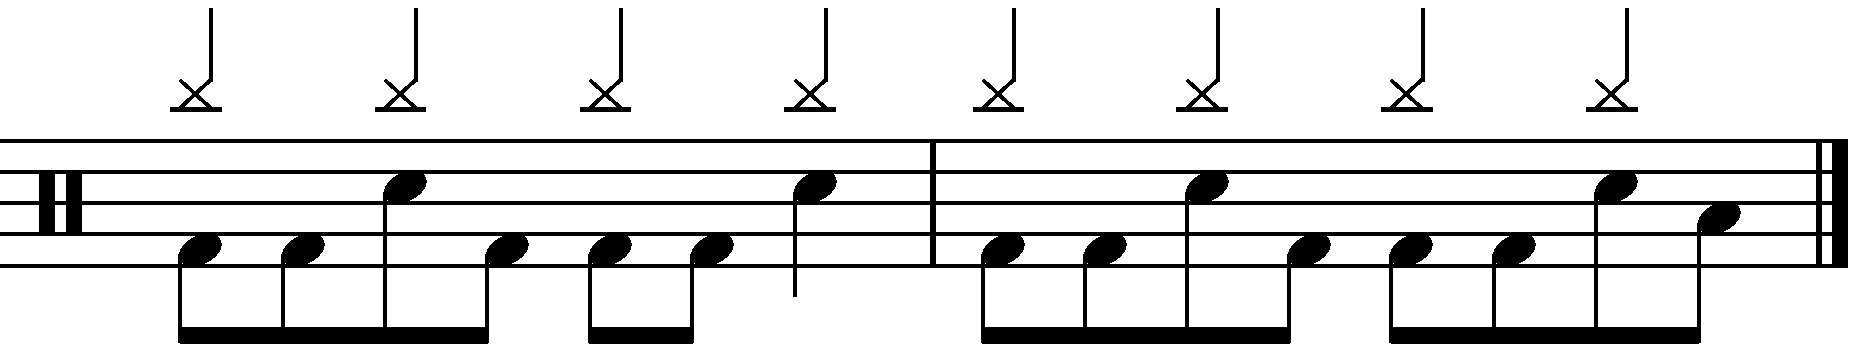 2 Bar Grooves - Example 3f